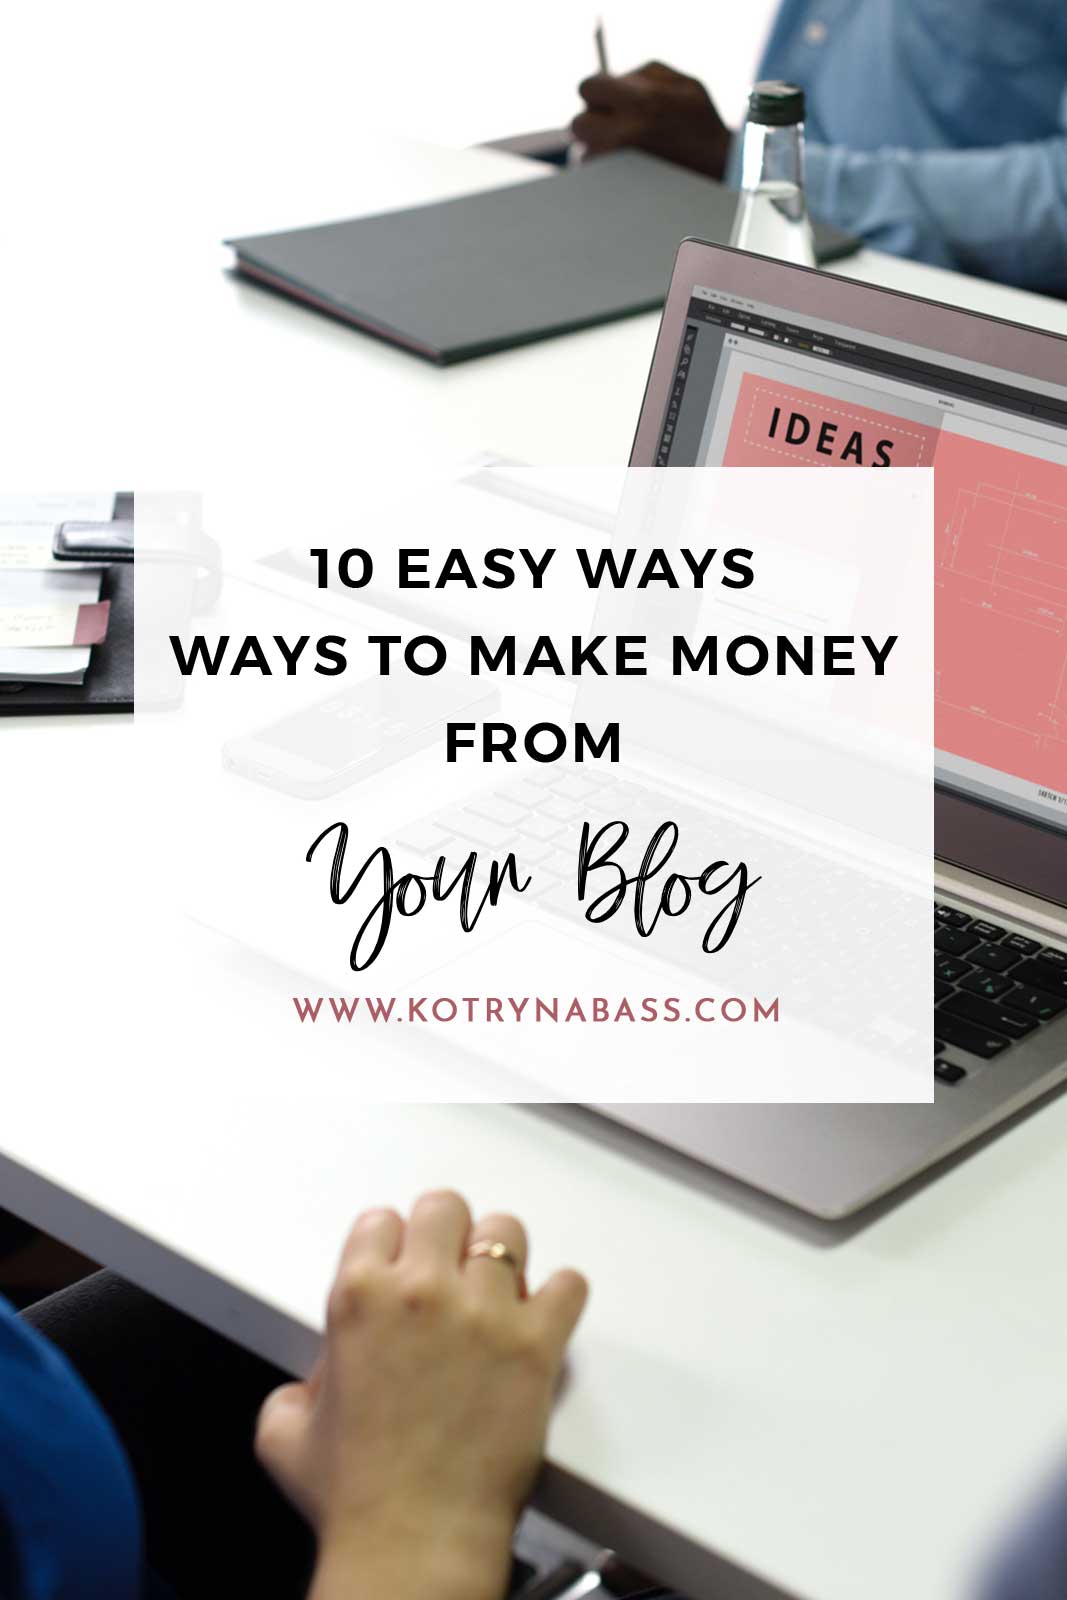 Making money off a blog can be done in so many different ways these days. From ad placement or affiliate marketing to introducing their own services, the sky really has no limits when it comes to monetising your online presence. Find 10 ways in this post!